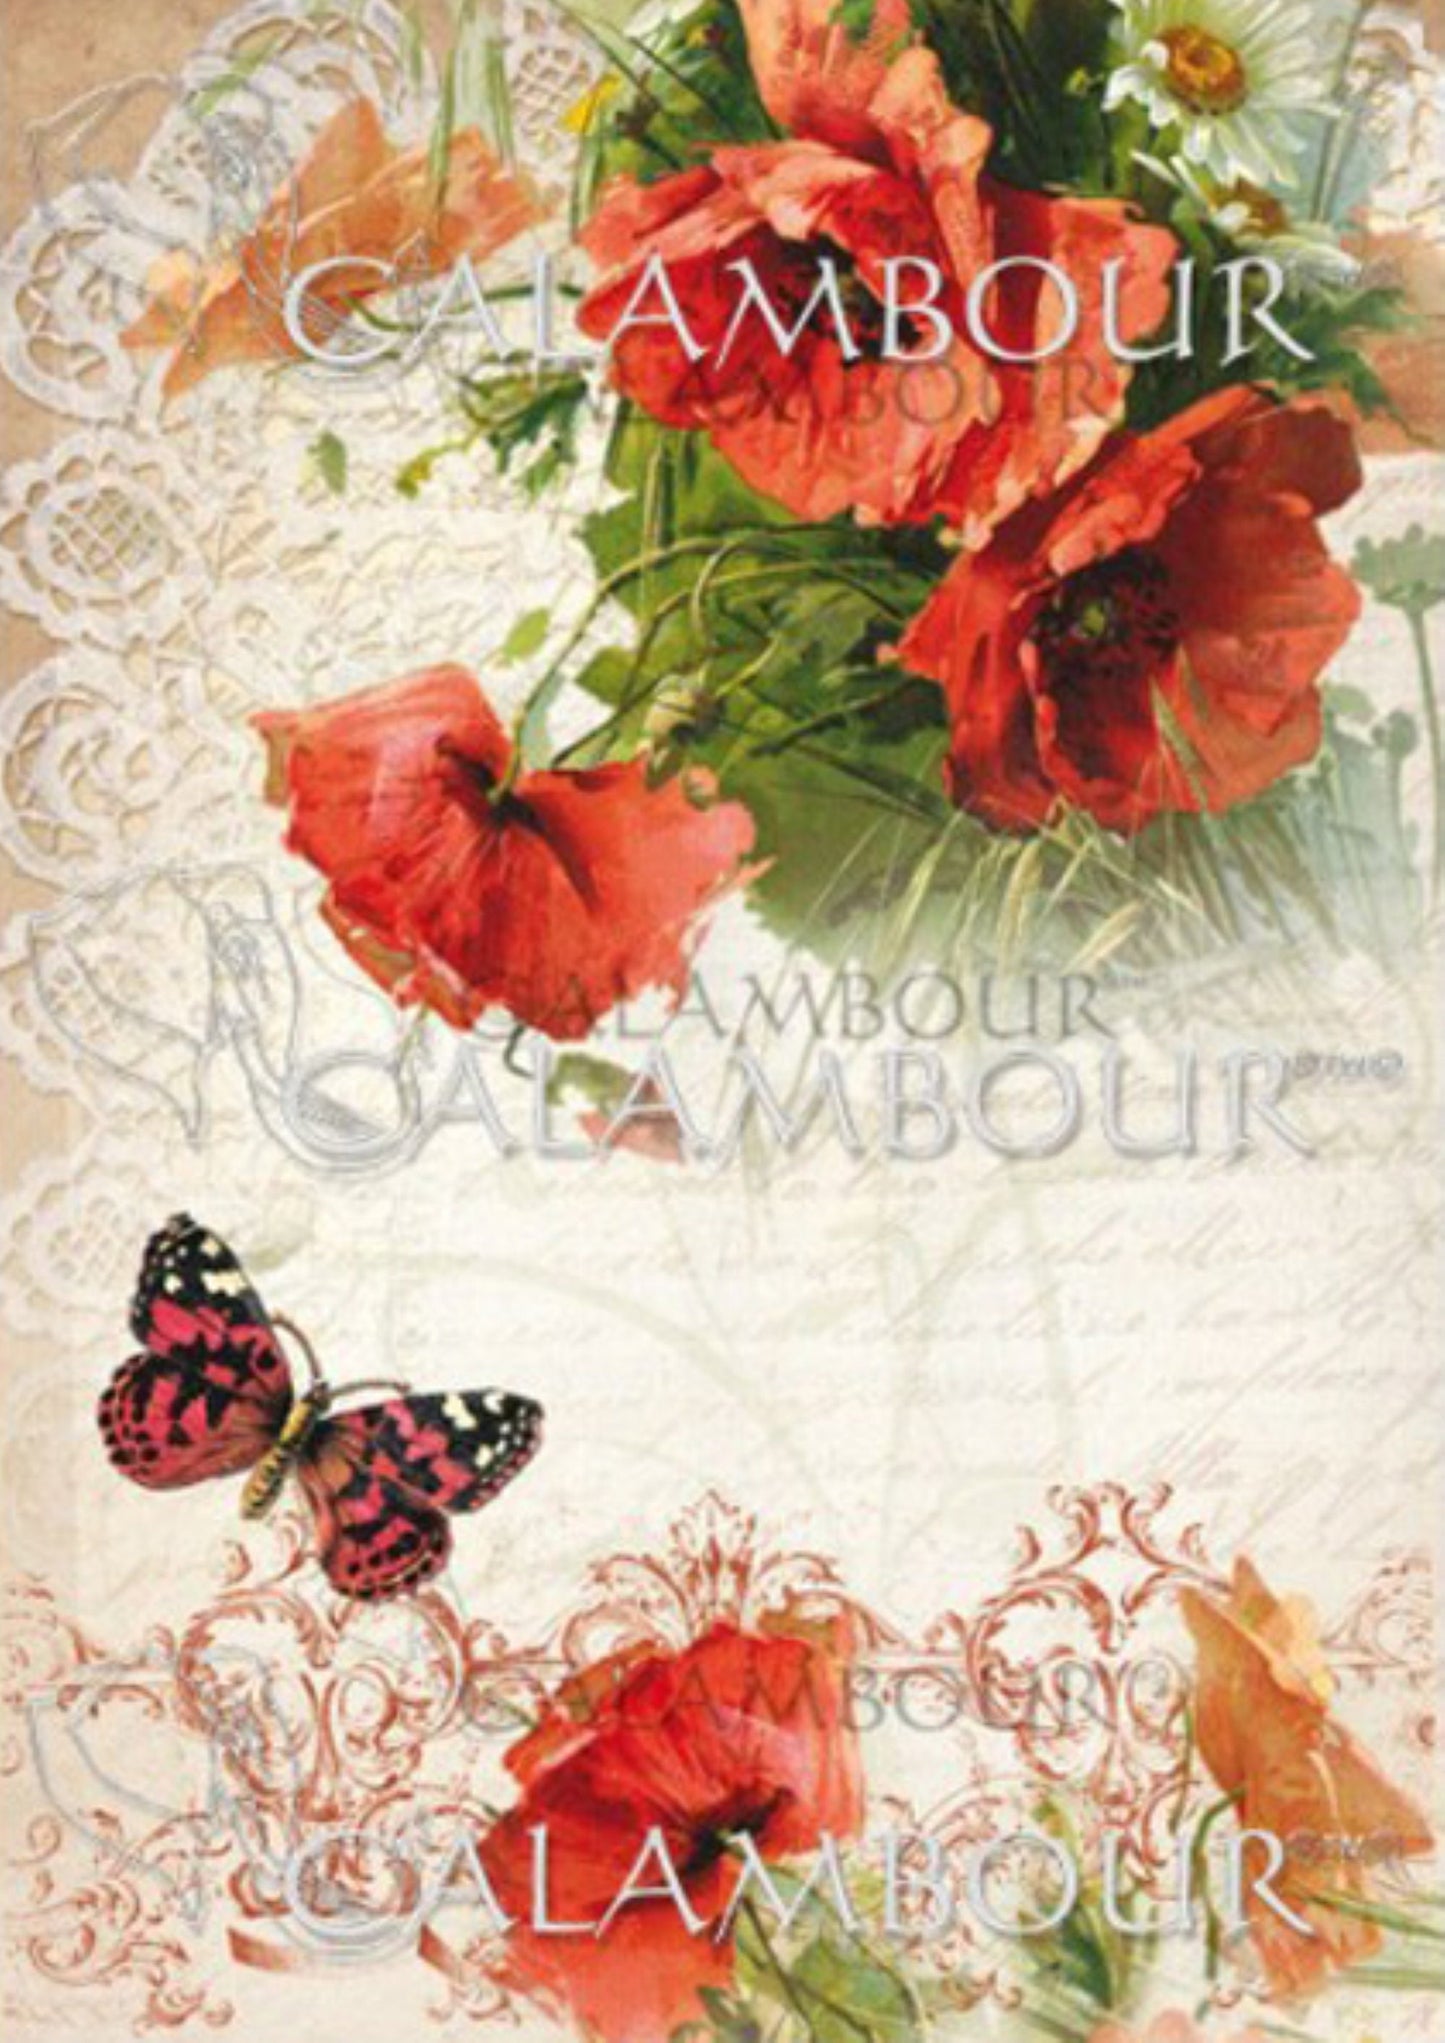 Calambour Italian Design Parisienne Collection, Red Flowers, Butterfly, TT014 Mulberry Rice Paper Decoupage 23 x 32 cm 9 x 12.5 in A4